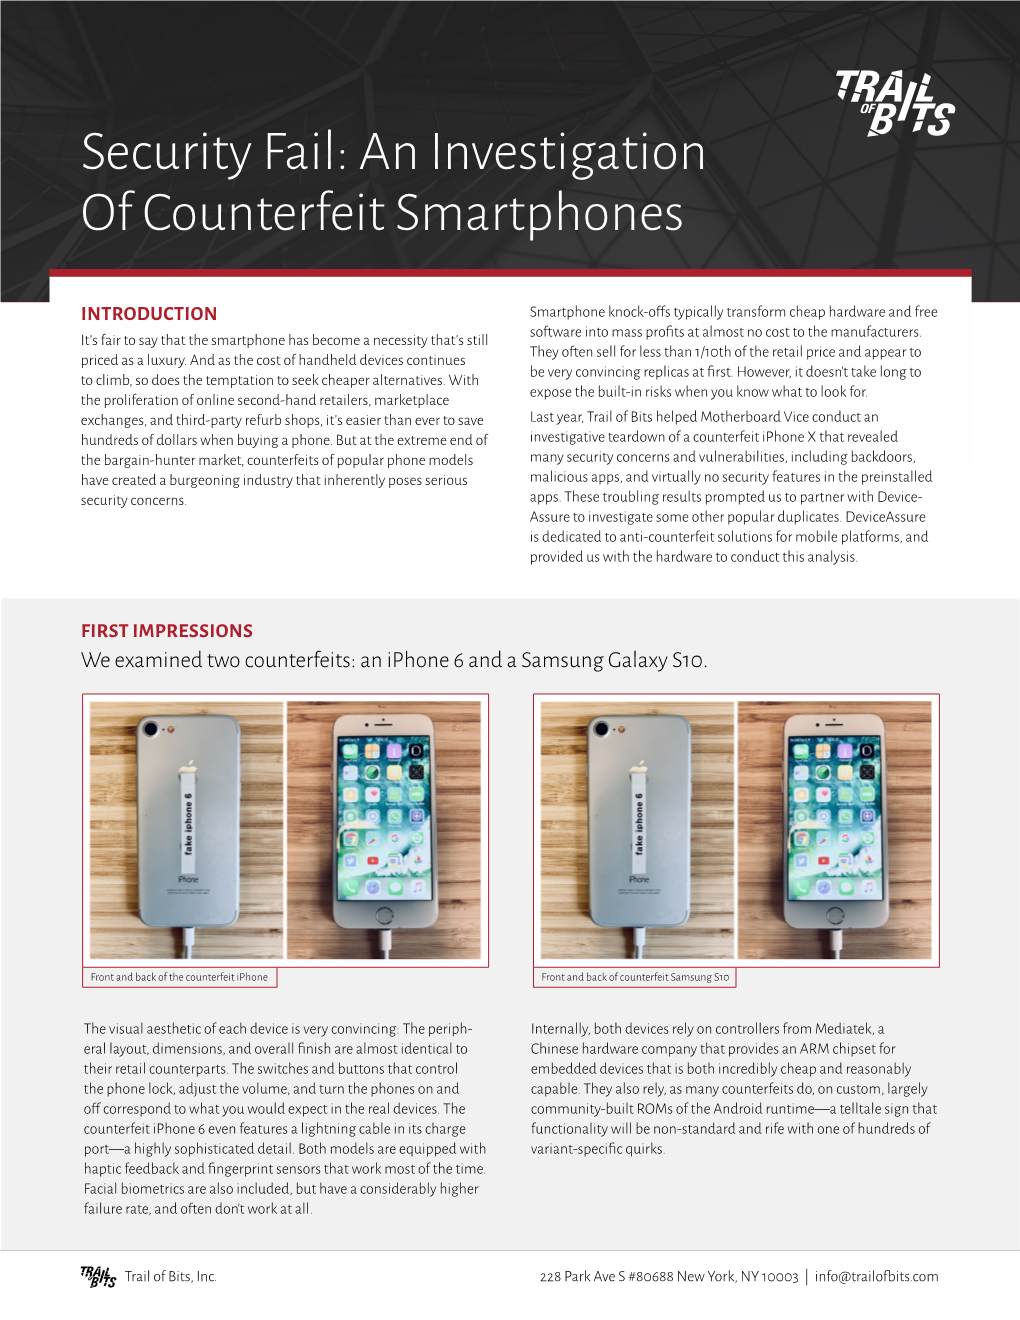 Security Fail: an Investigation of Counterfeit Smartphones